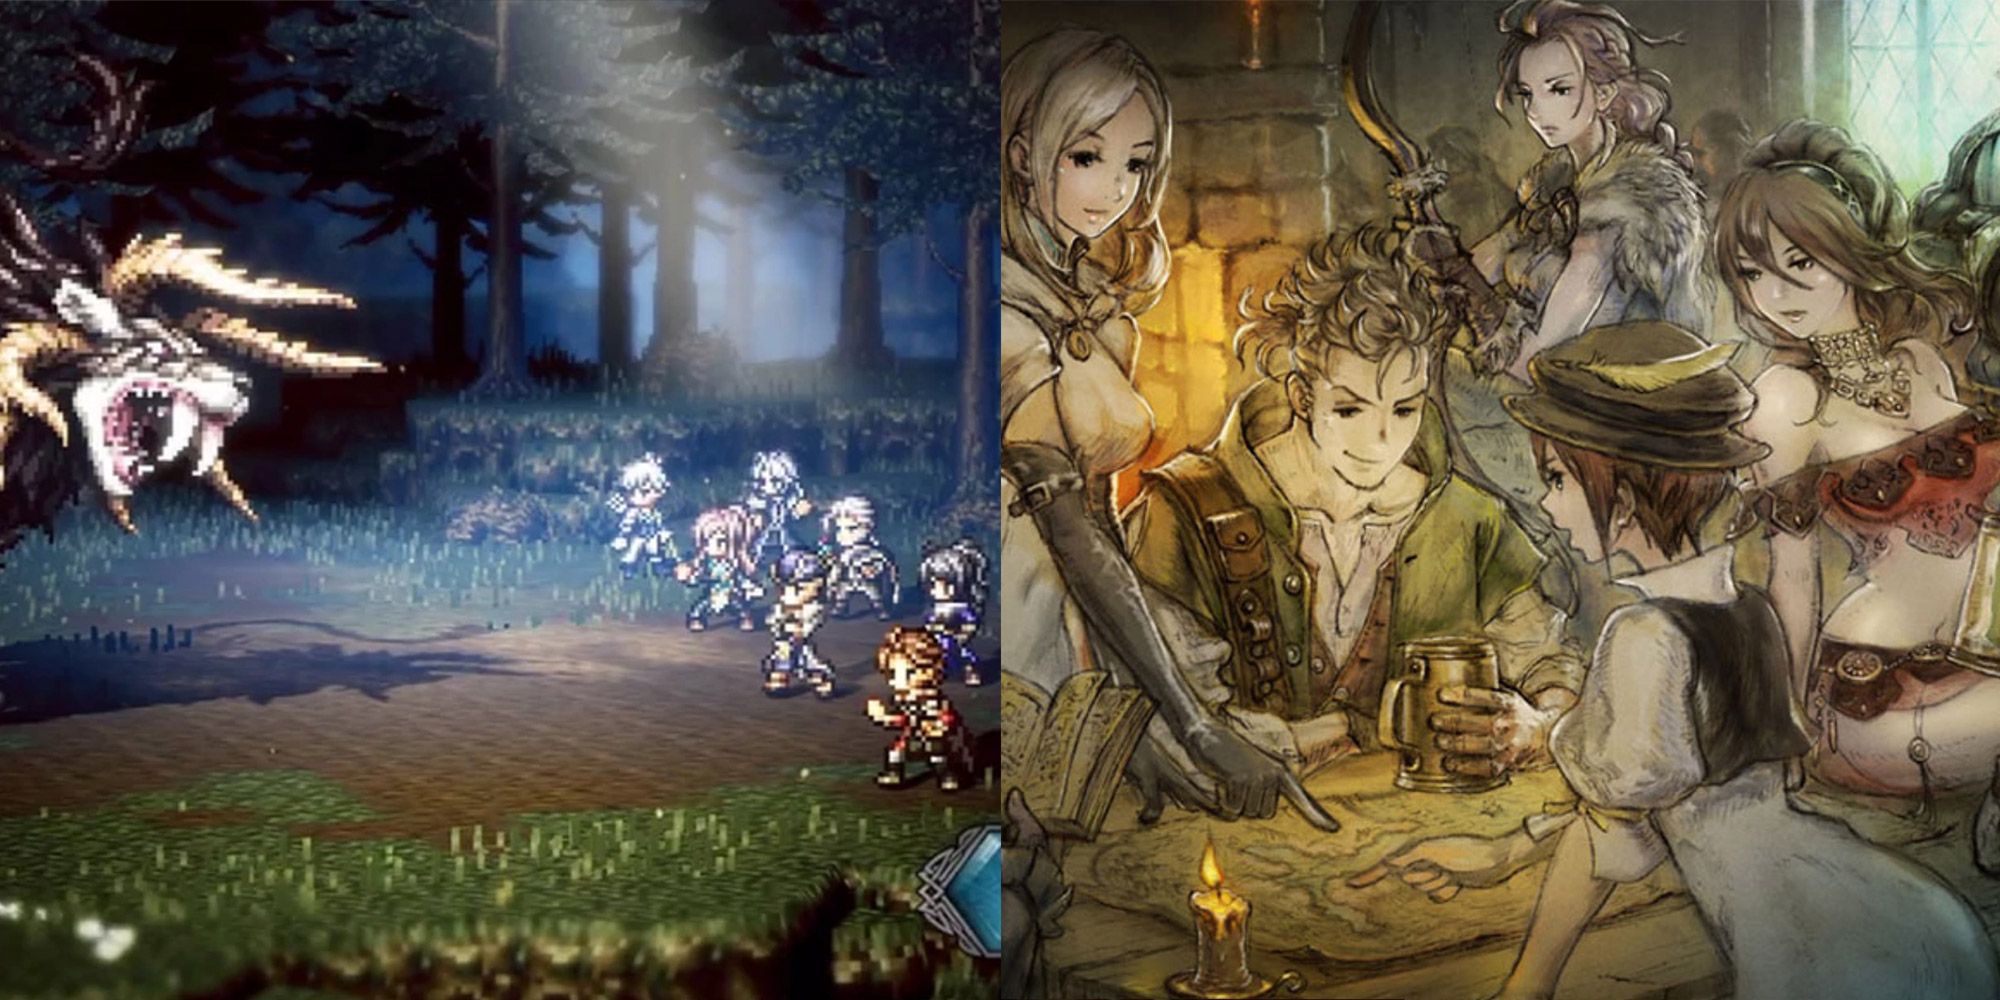 download octopath traveler champions of the continent beginner guide for free